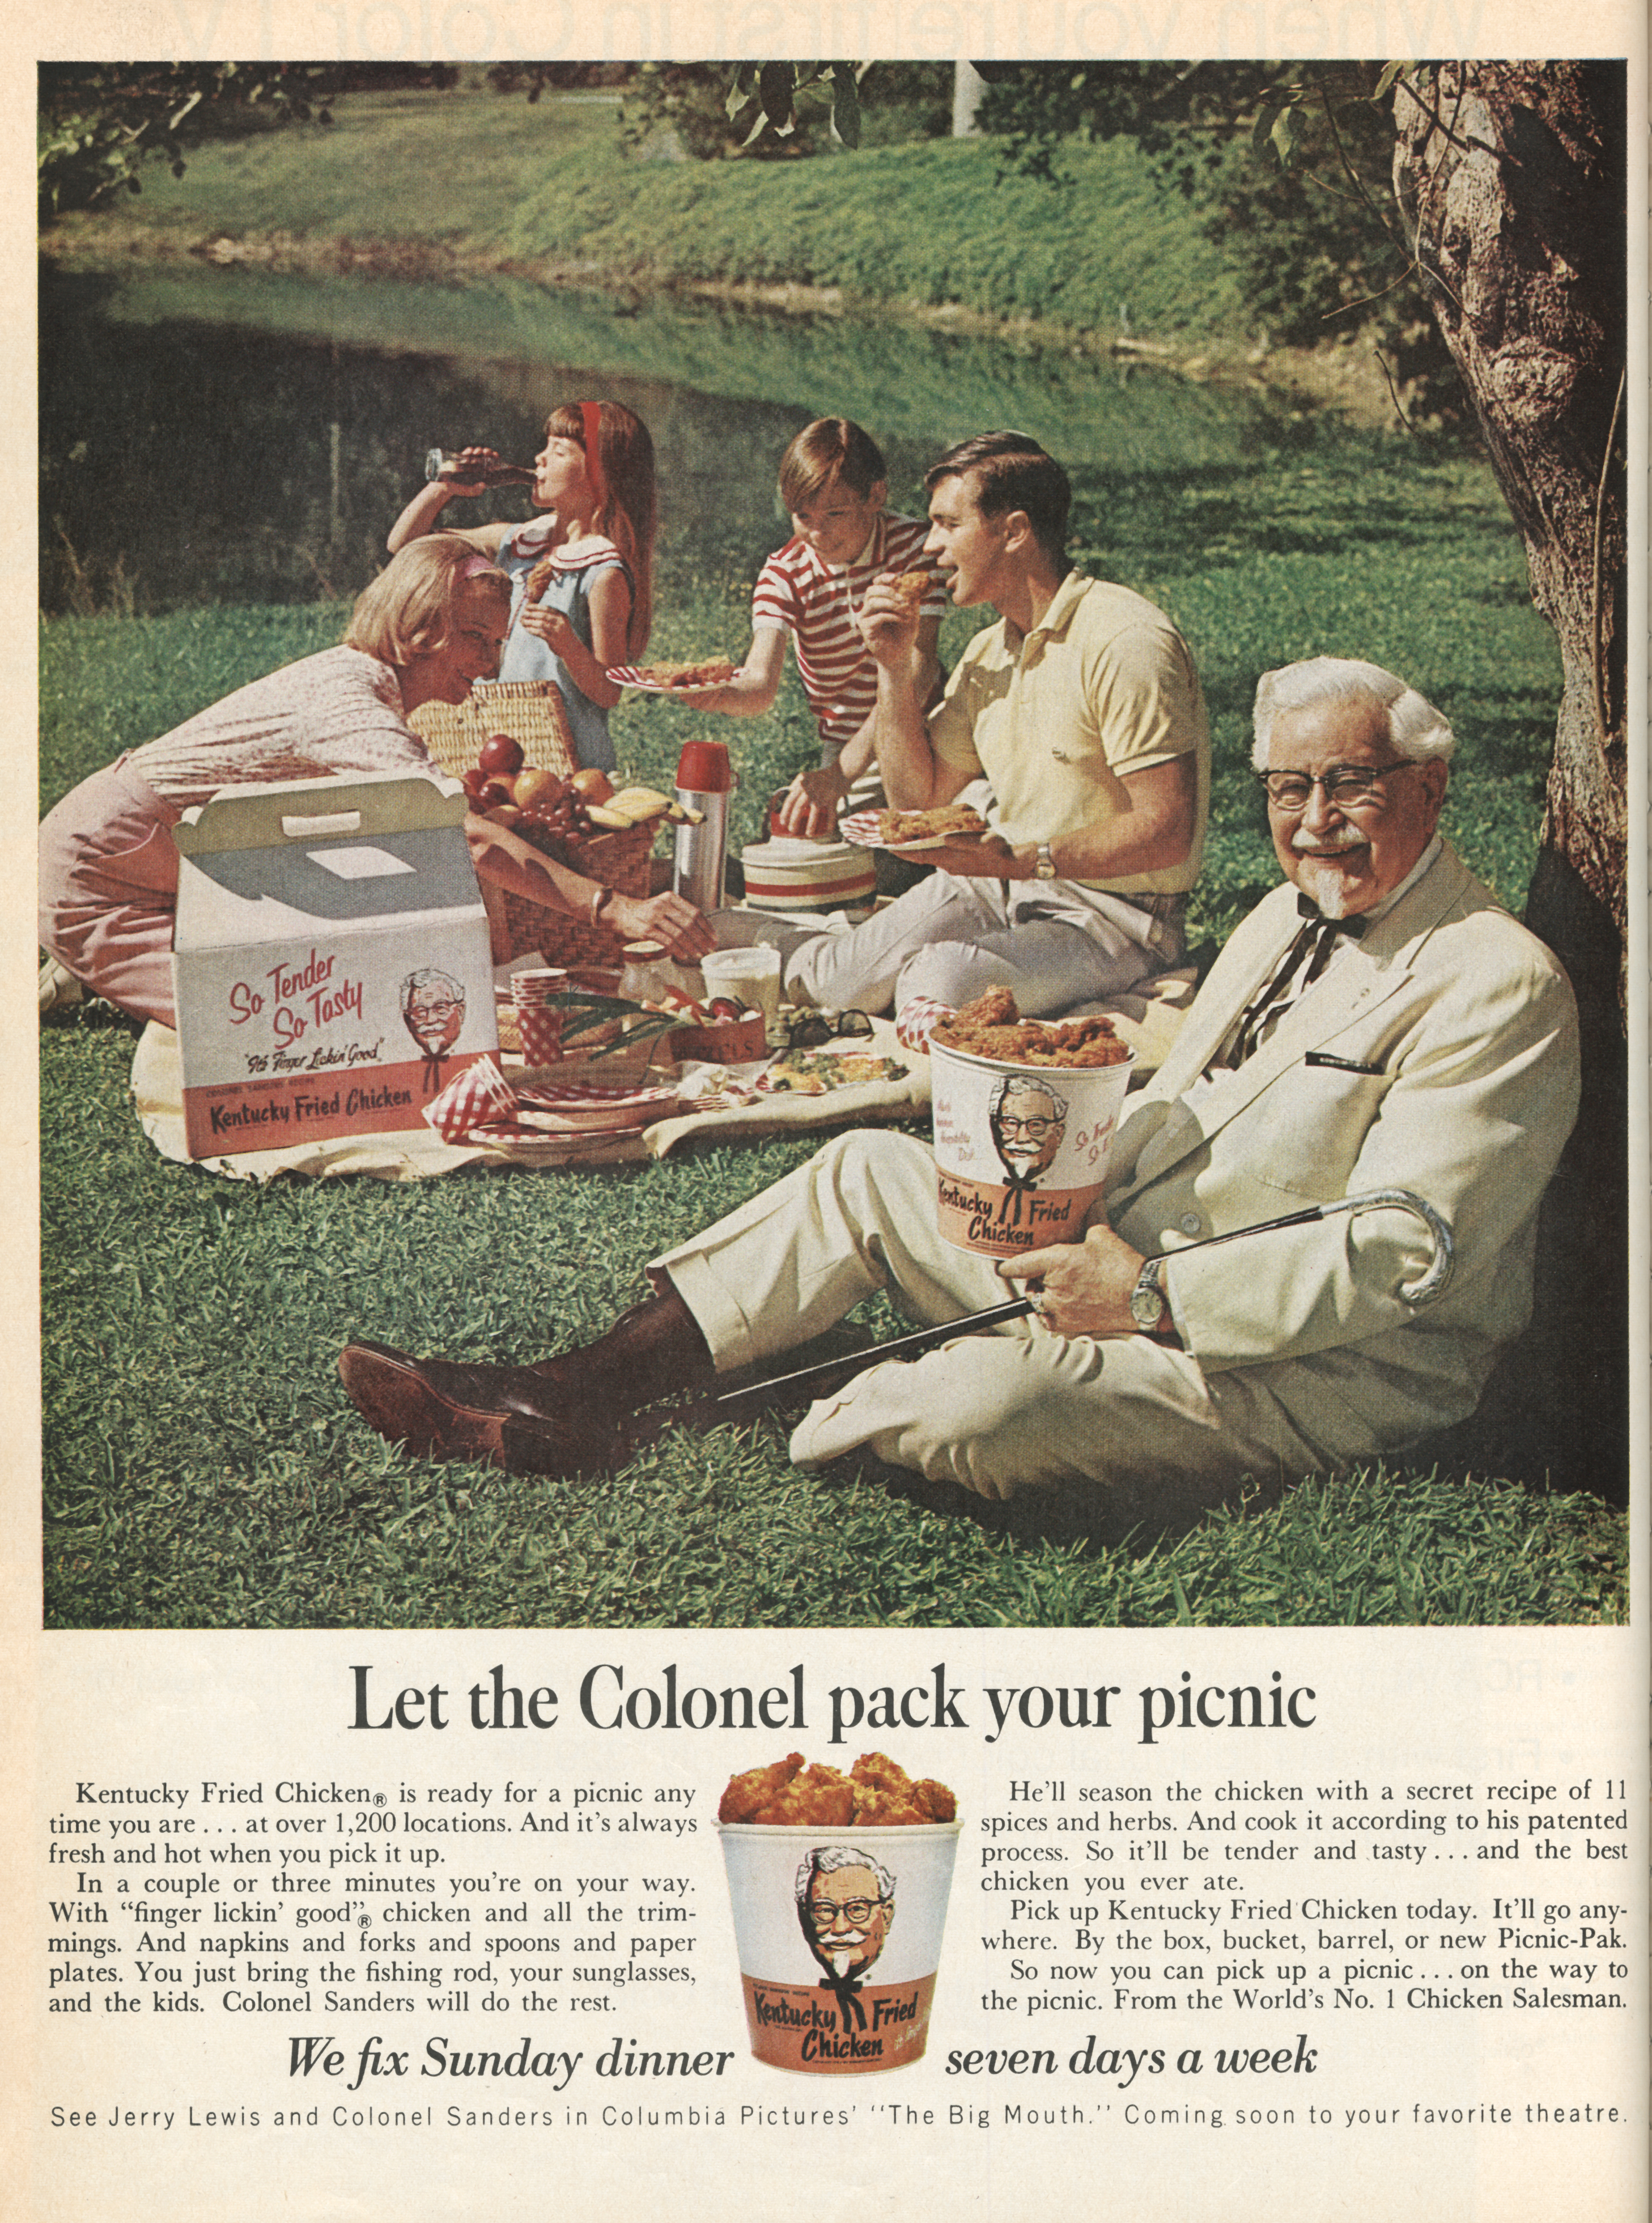 Kentucky Fried Chicken - published in Life - June 9, 1967